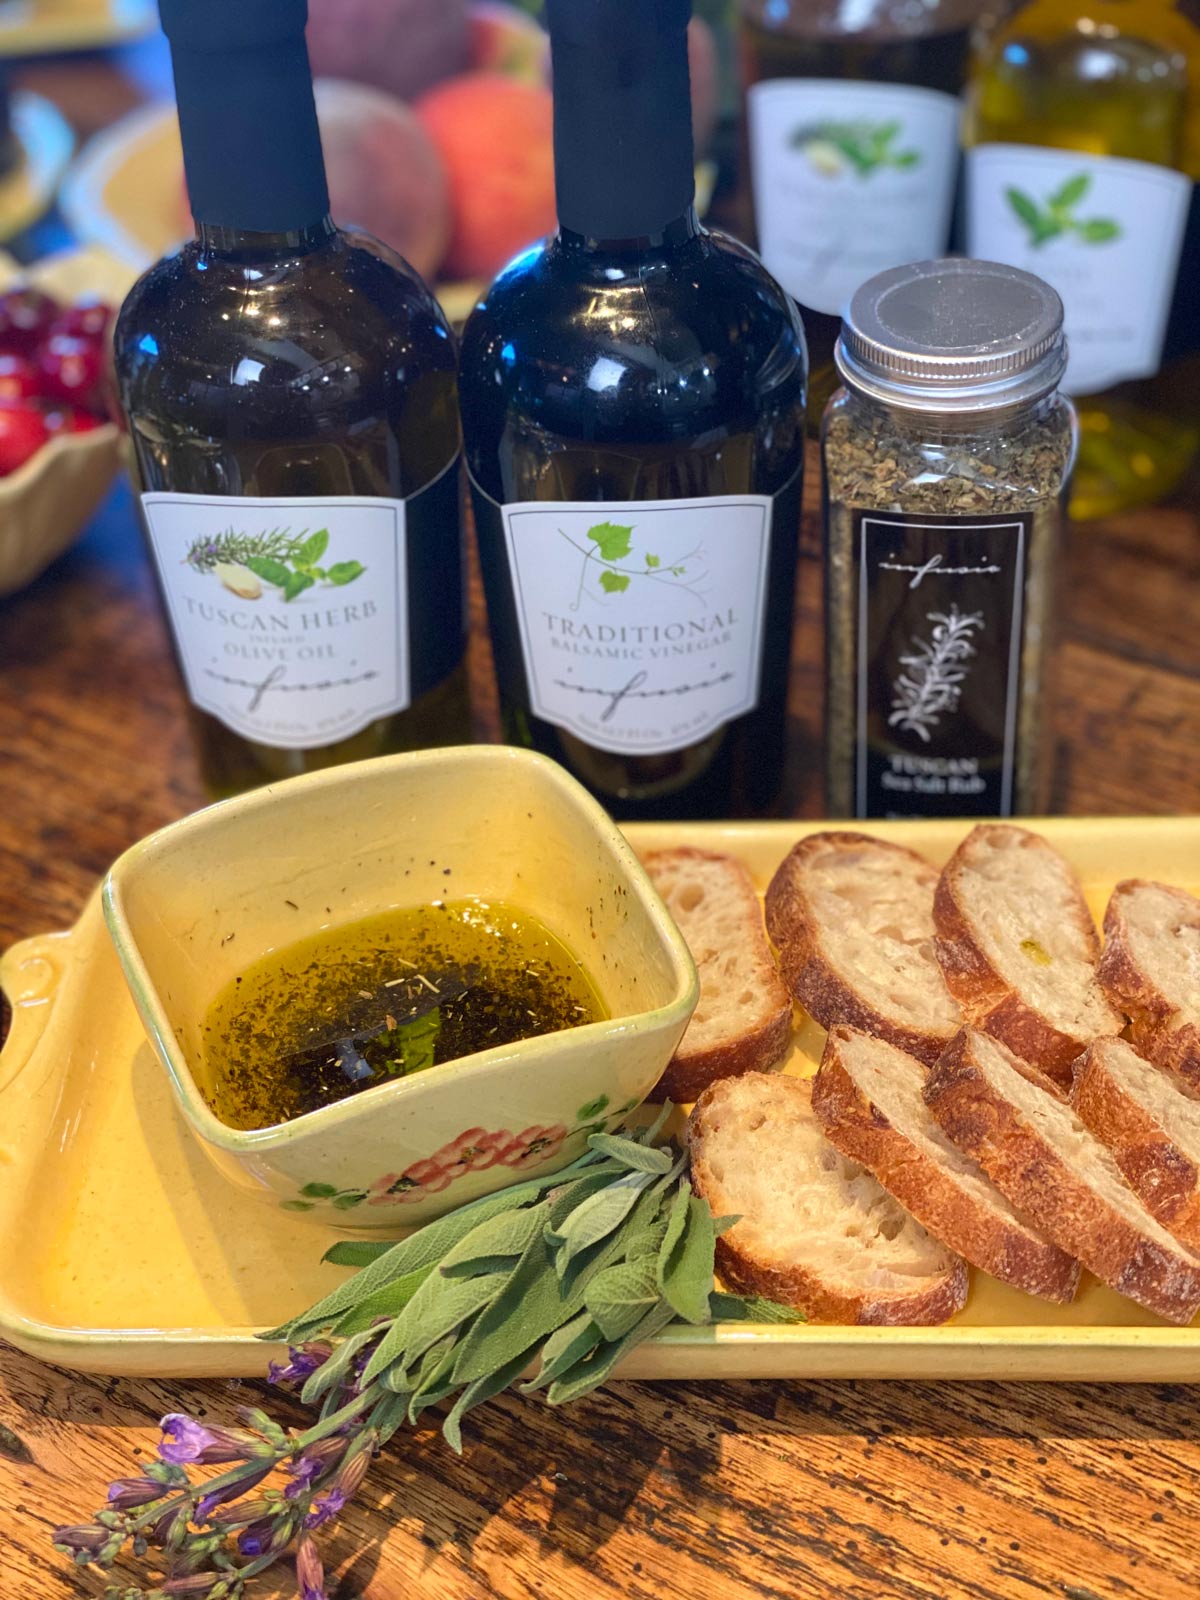 bread with olive oil